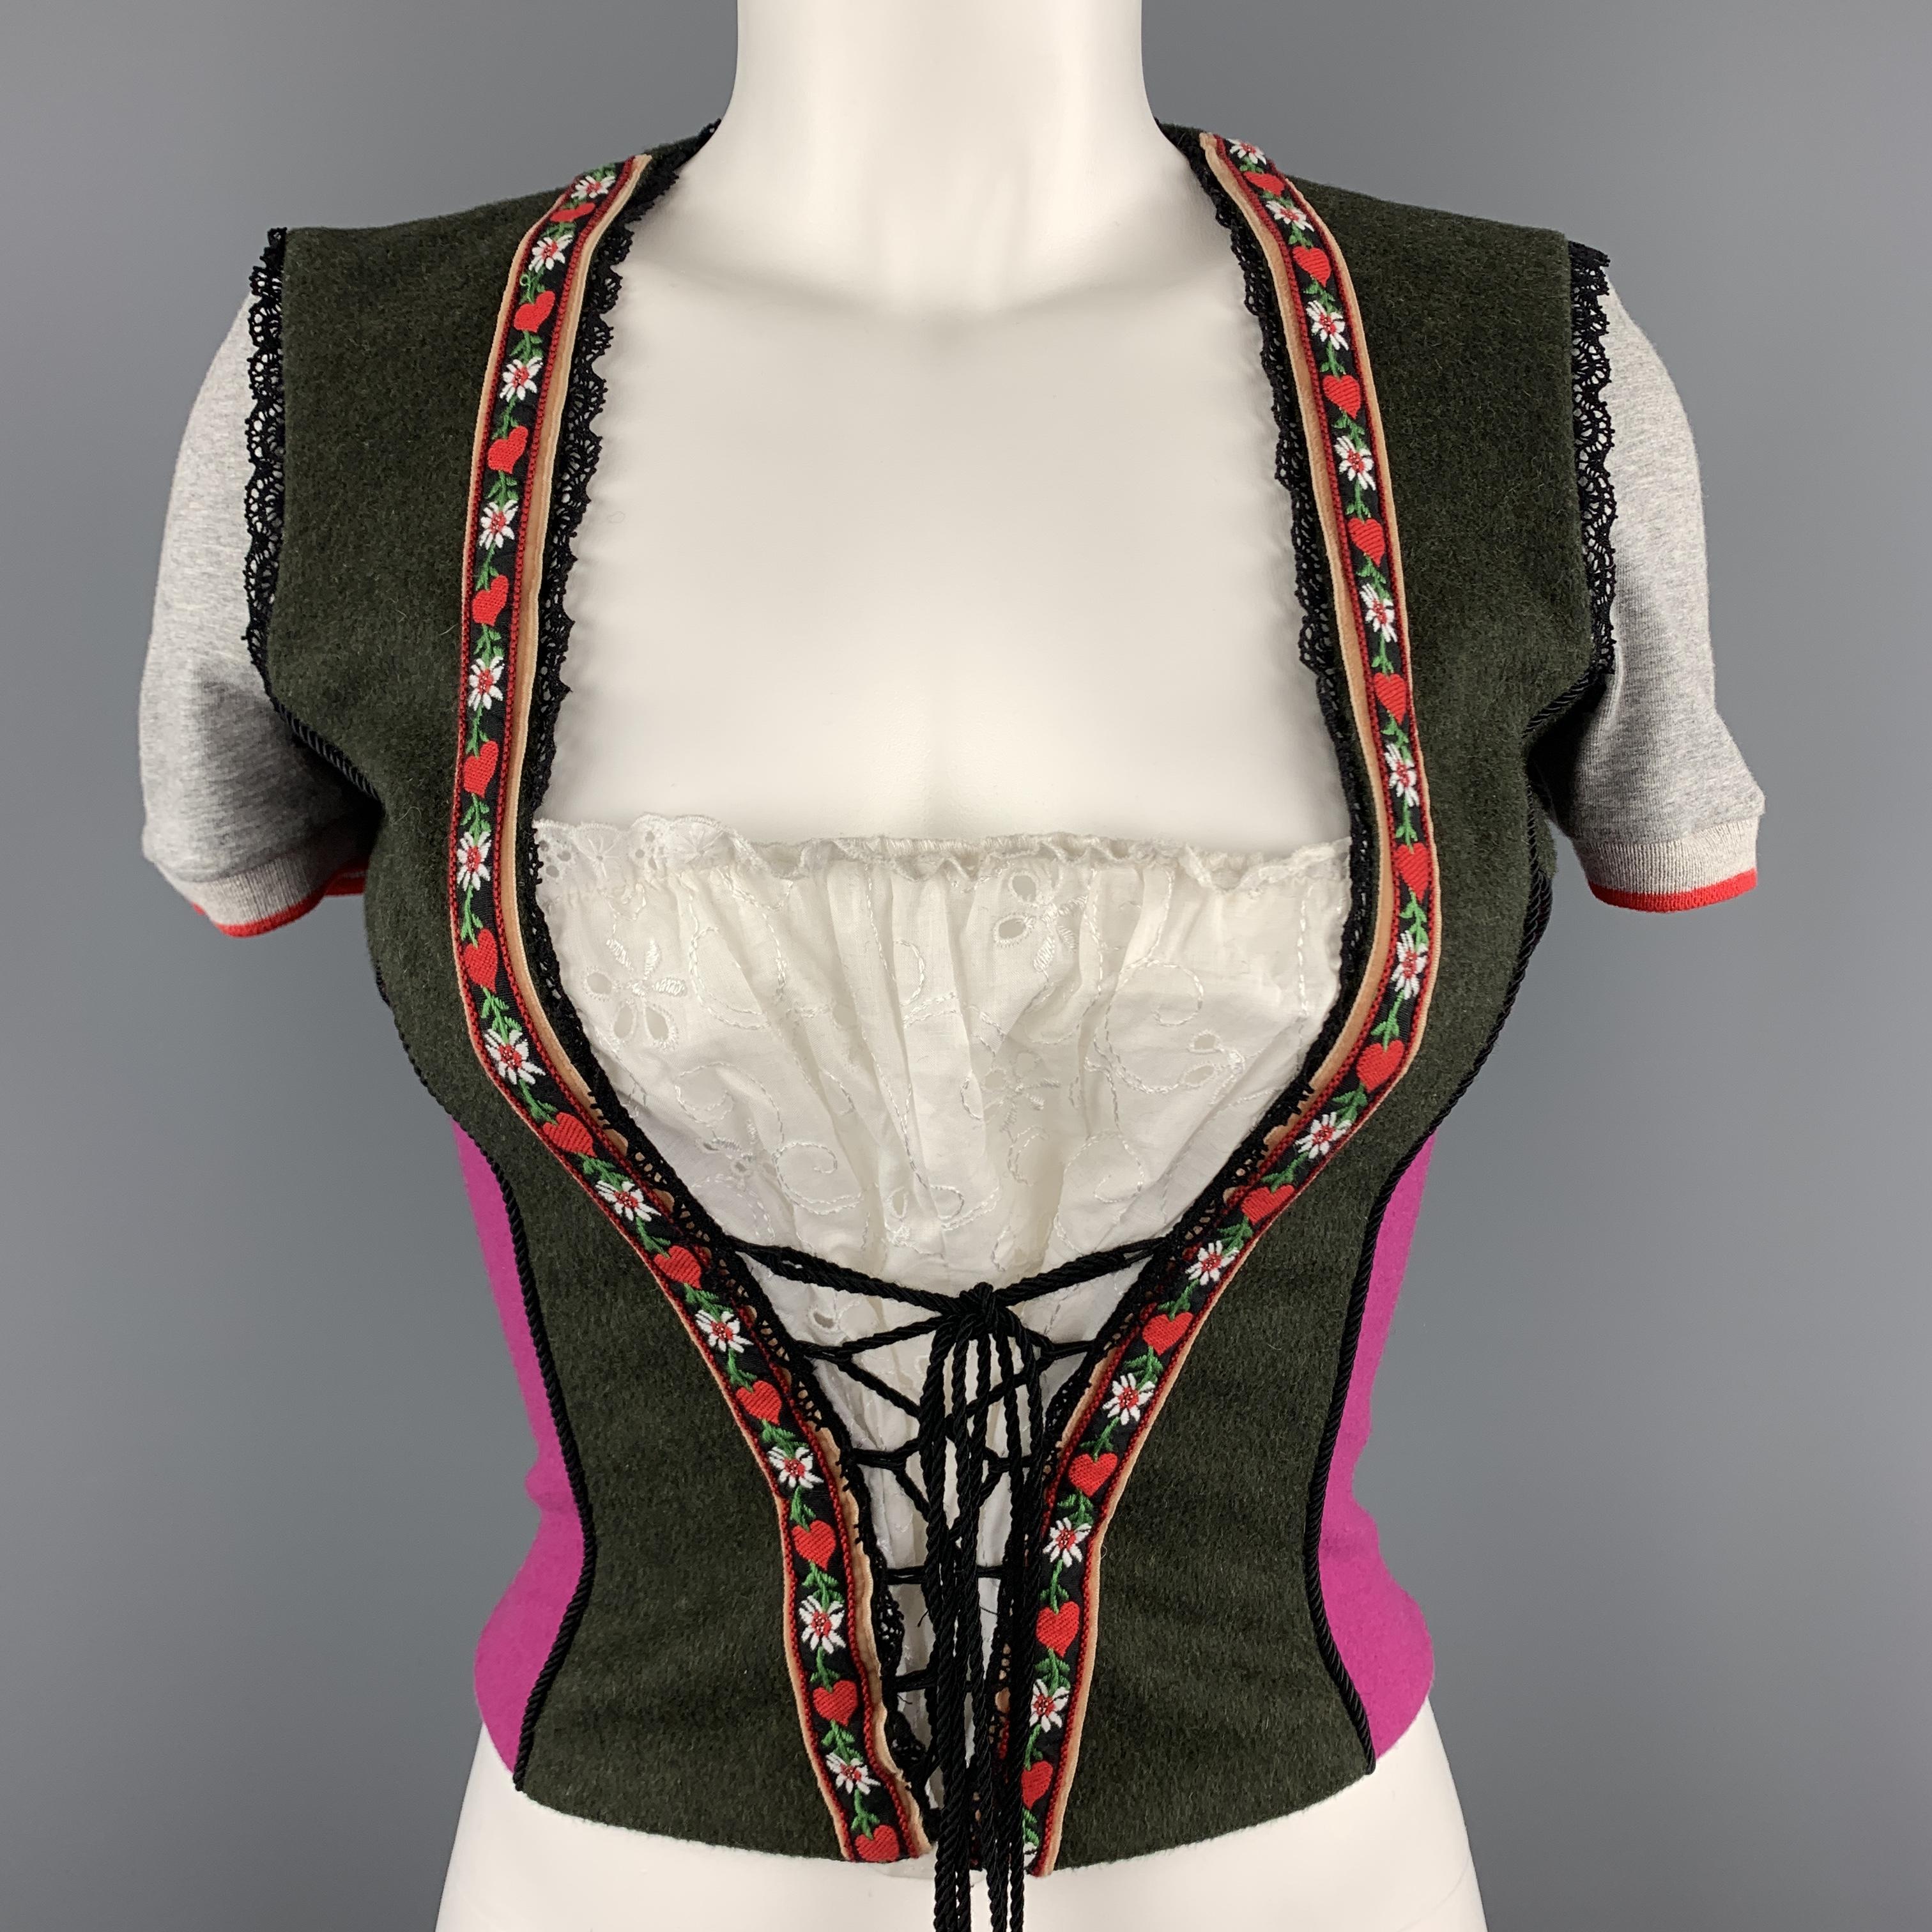 Archive D&G all 2002 Collection bustier top comes in fuchsia pink and olive green color block felt with heart flower ribbon trim, lace up front, boning, gray jersey sleeves, and  white ruffled lace insert. Made in Italy.

New with Tags. 
Marked: IT